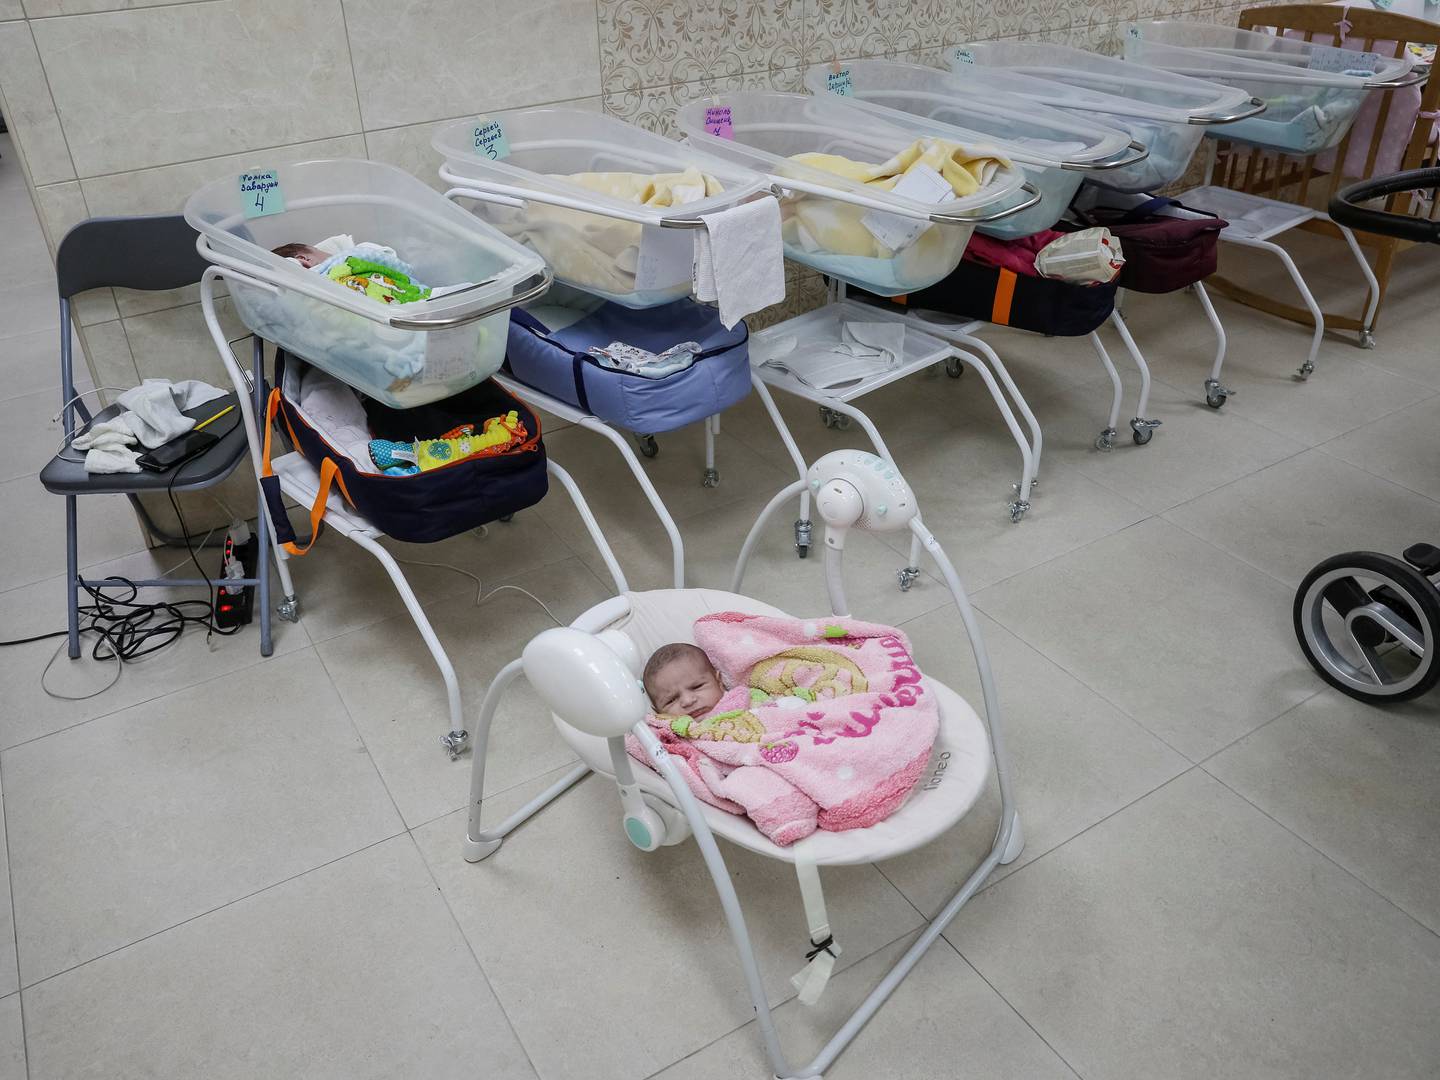 Surrogate-born babies are seen inside a special shelter owned by BioTexCom clinic in a residential basement on the outskirts of Kyiv. Reuters